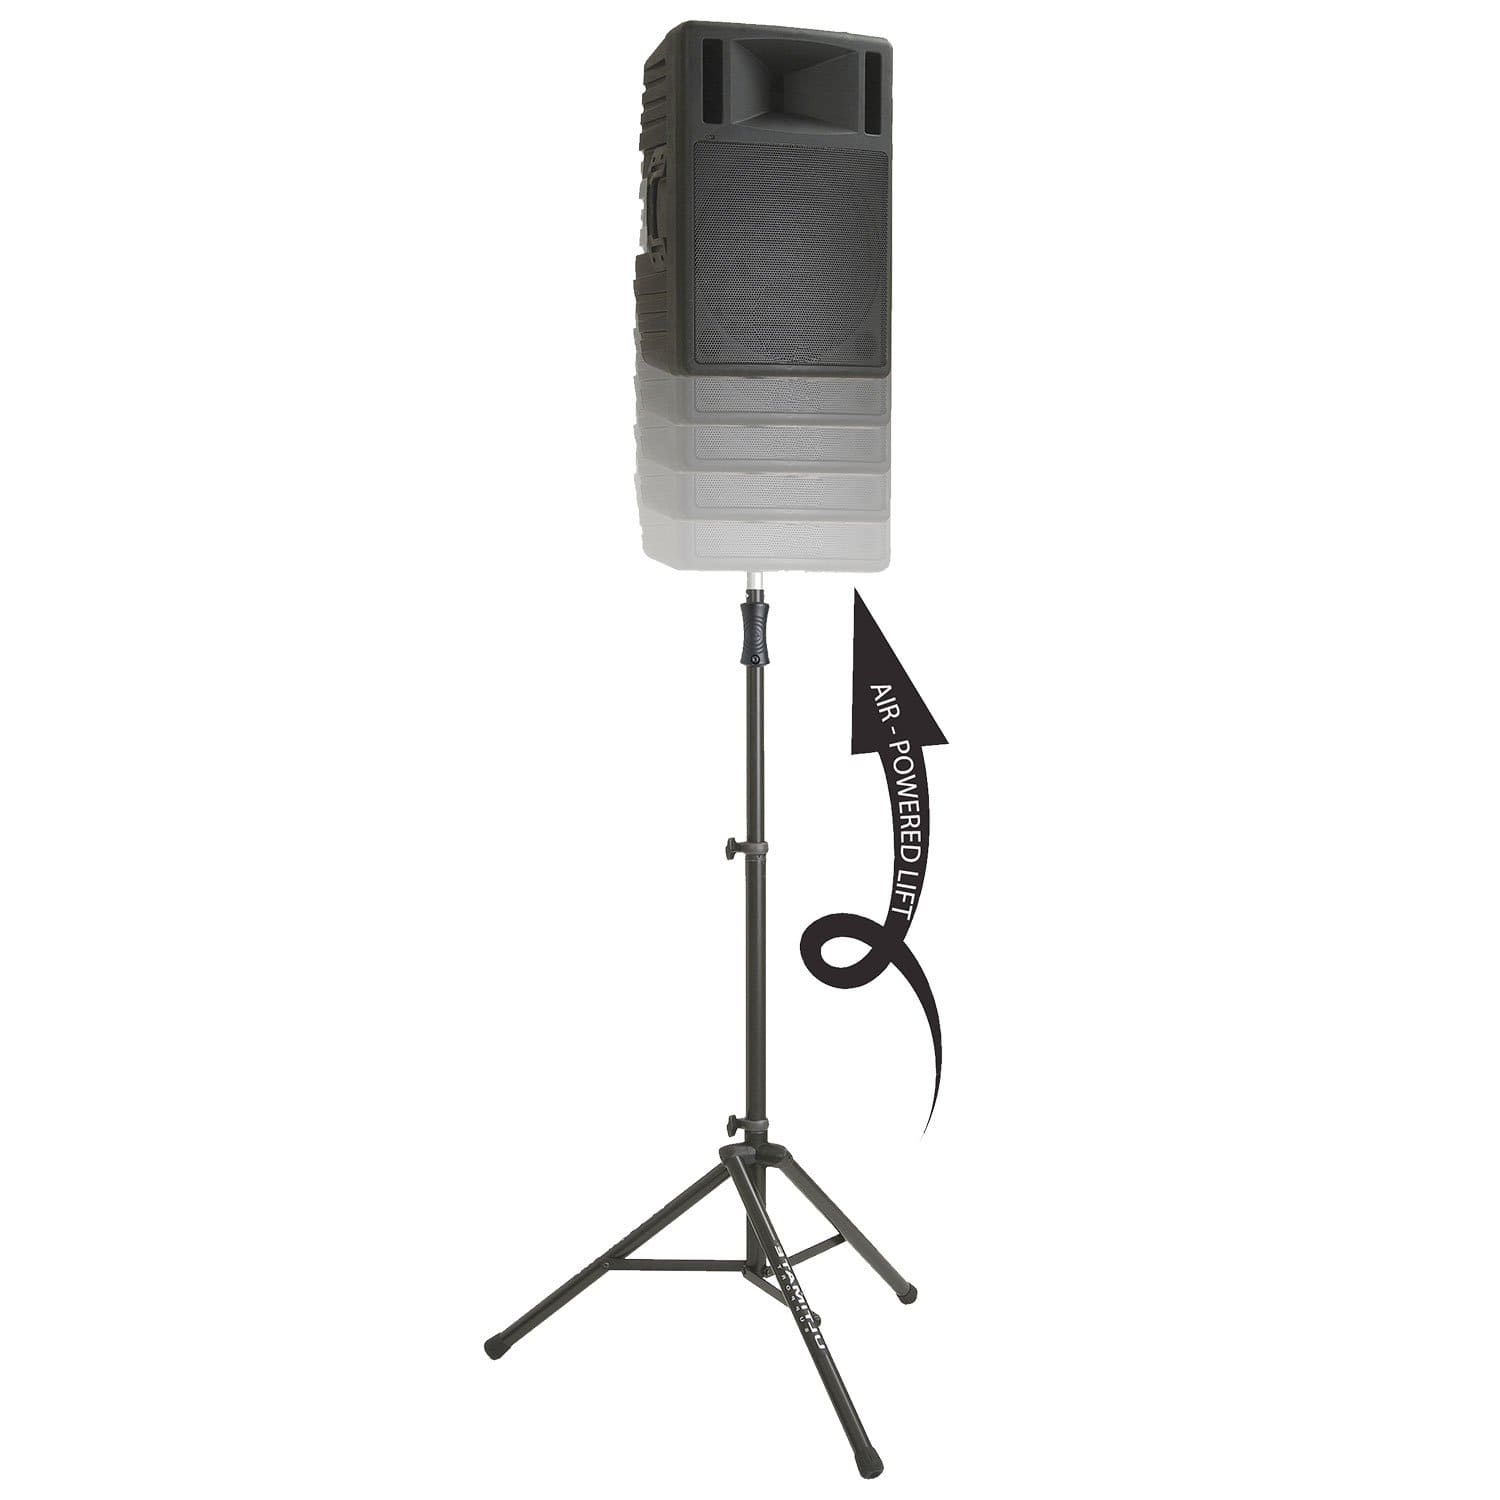 Ultimate TS-100 Speaker Stands with 15" Stretch Speaker Covers Black - PSSL ProSound and Stage Lighting